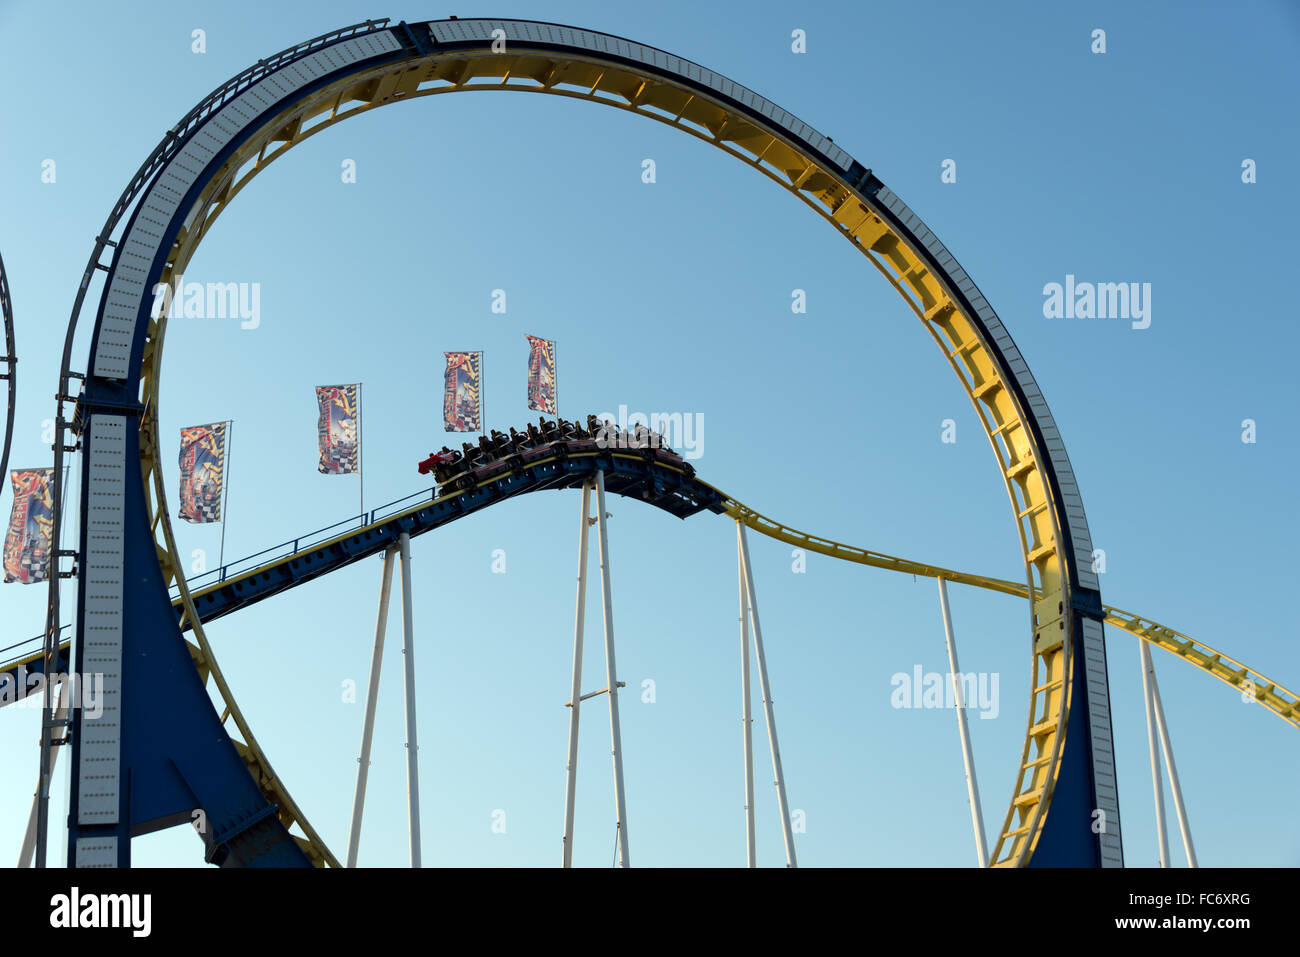 rollercoaster with looping Stock Photo